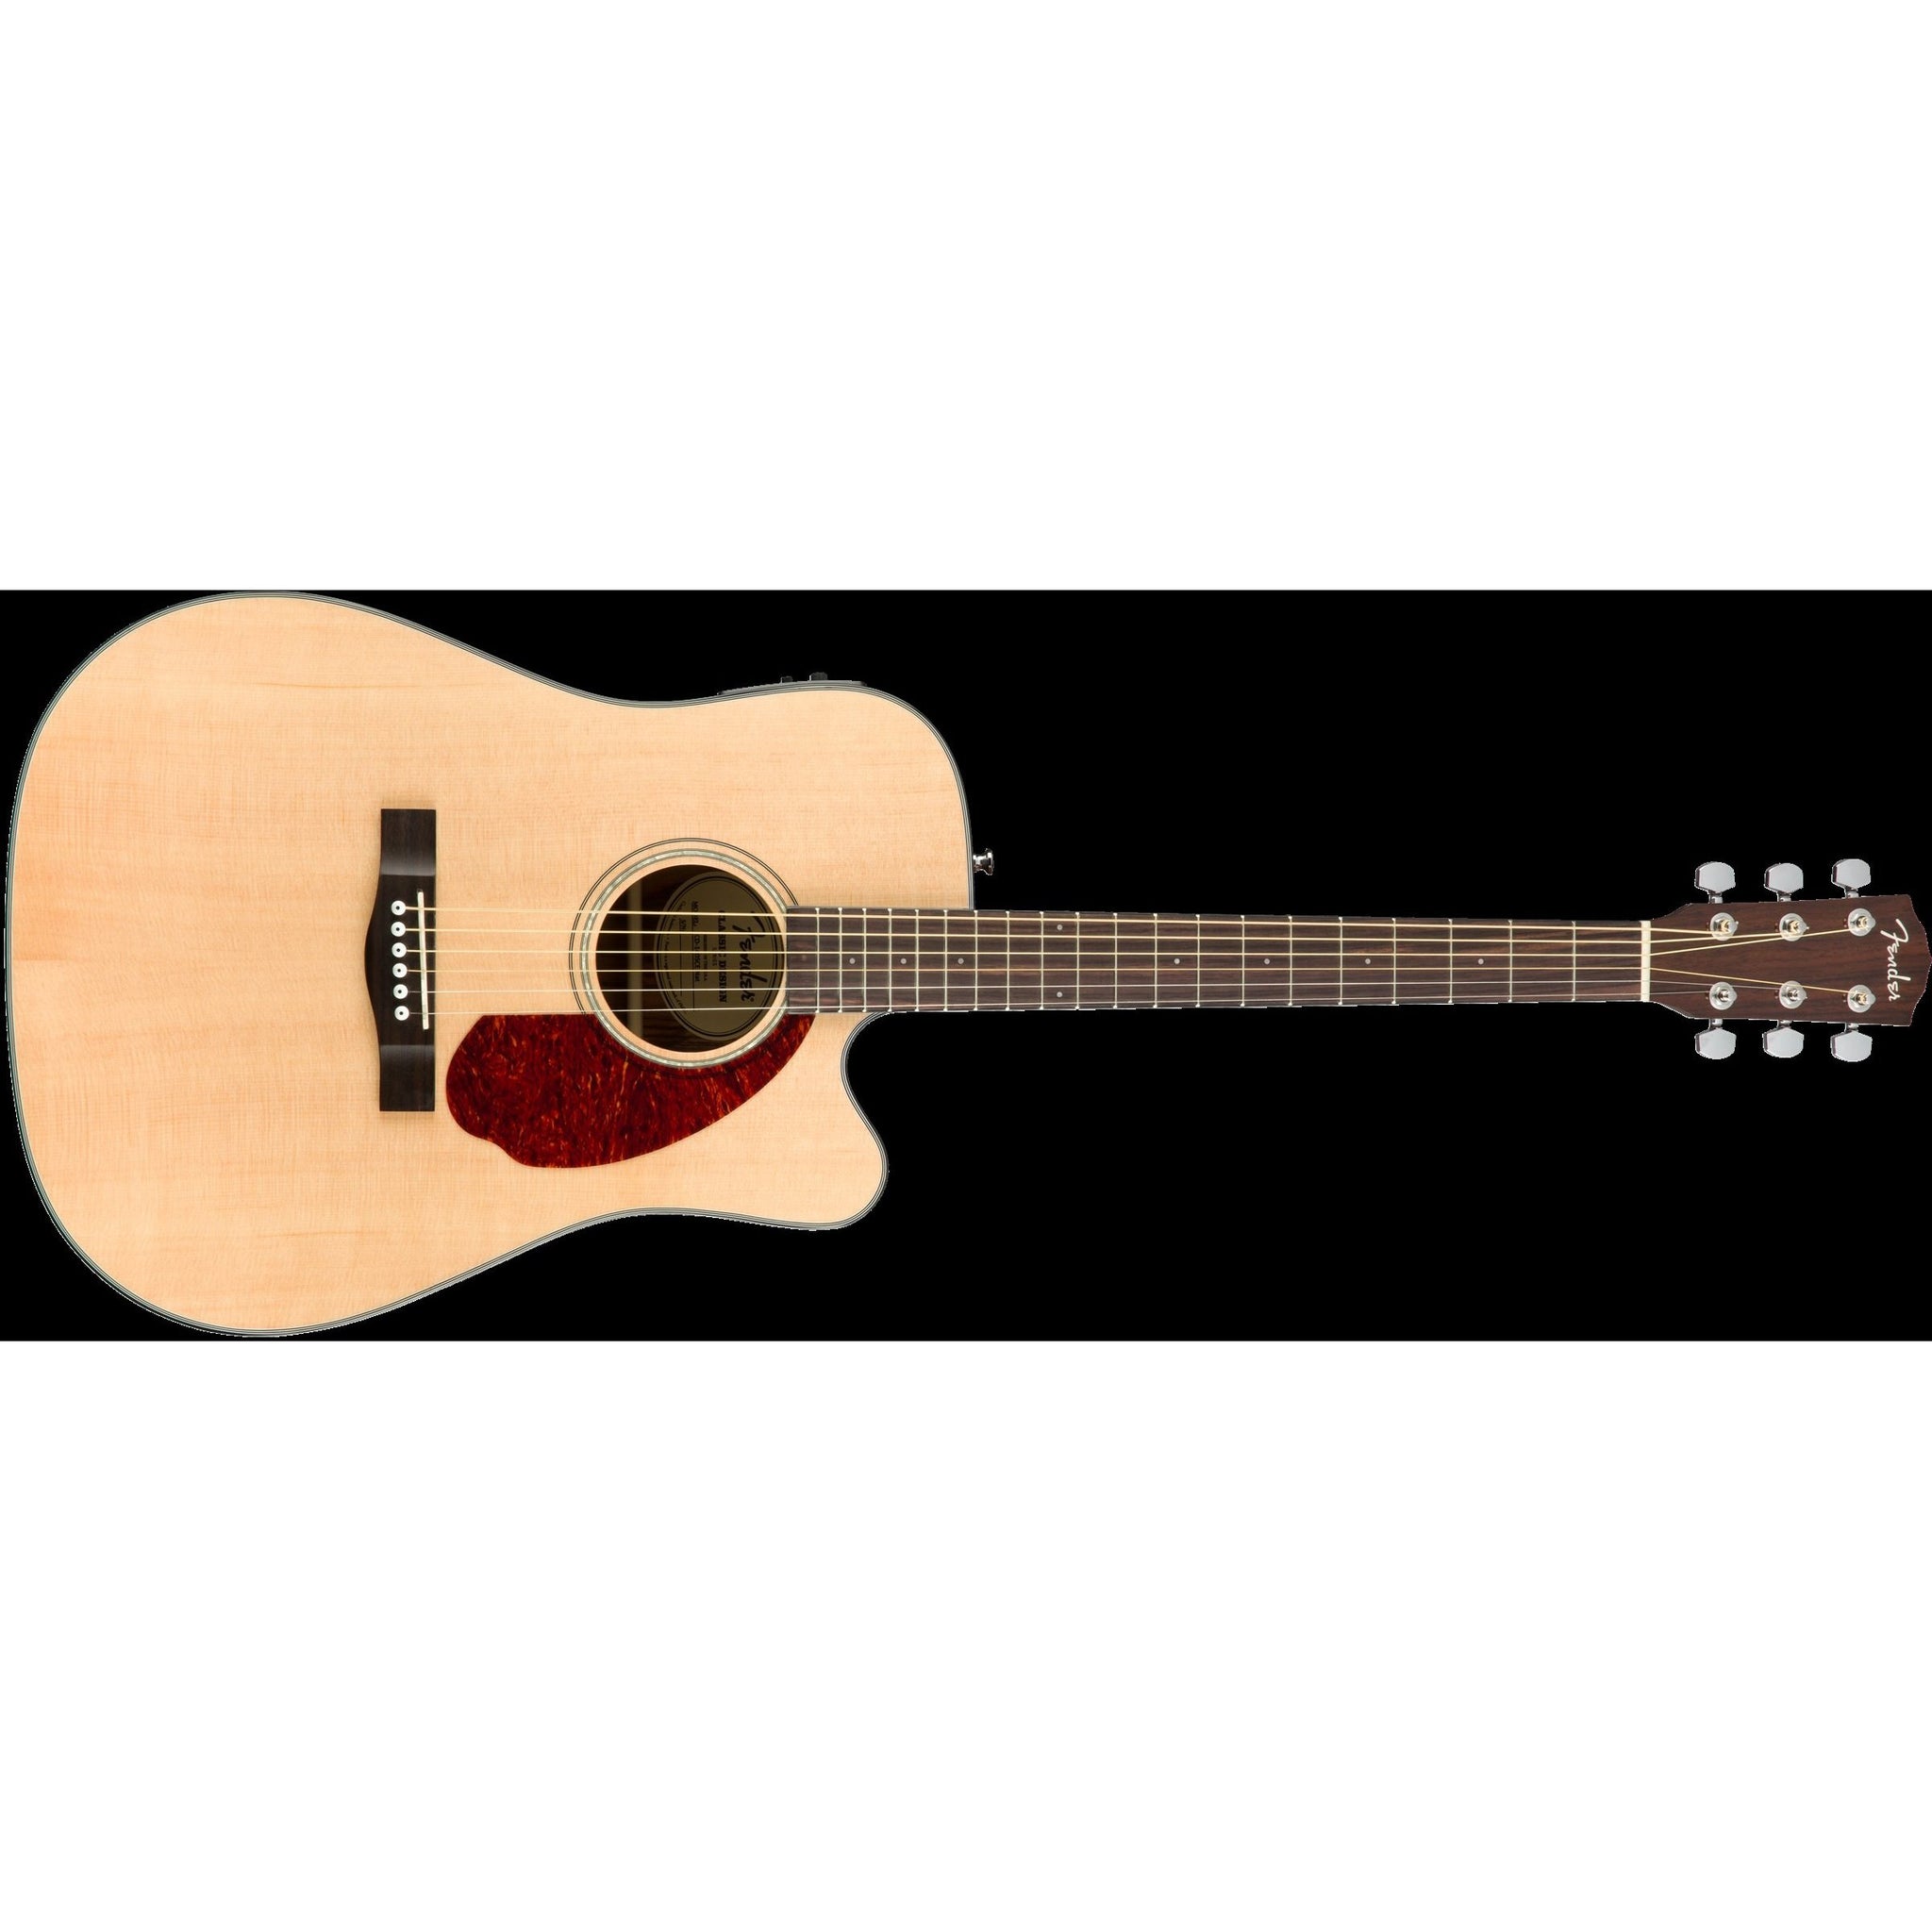 Fender CD-140SCE Acoustic/Electric Guitar with Hardshell Case-Natural (Discontinued)-Music World Academy